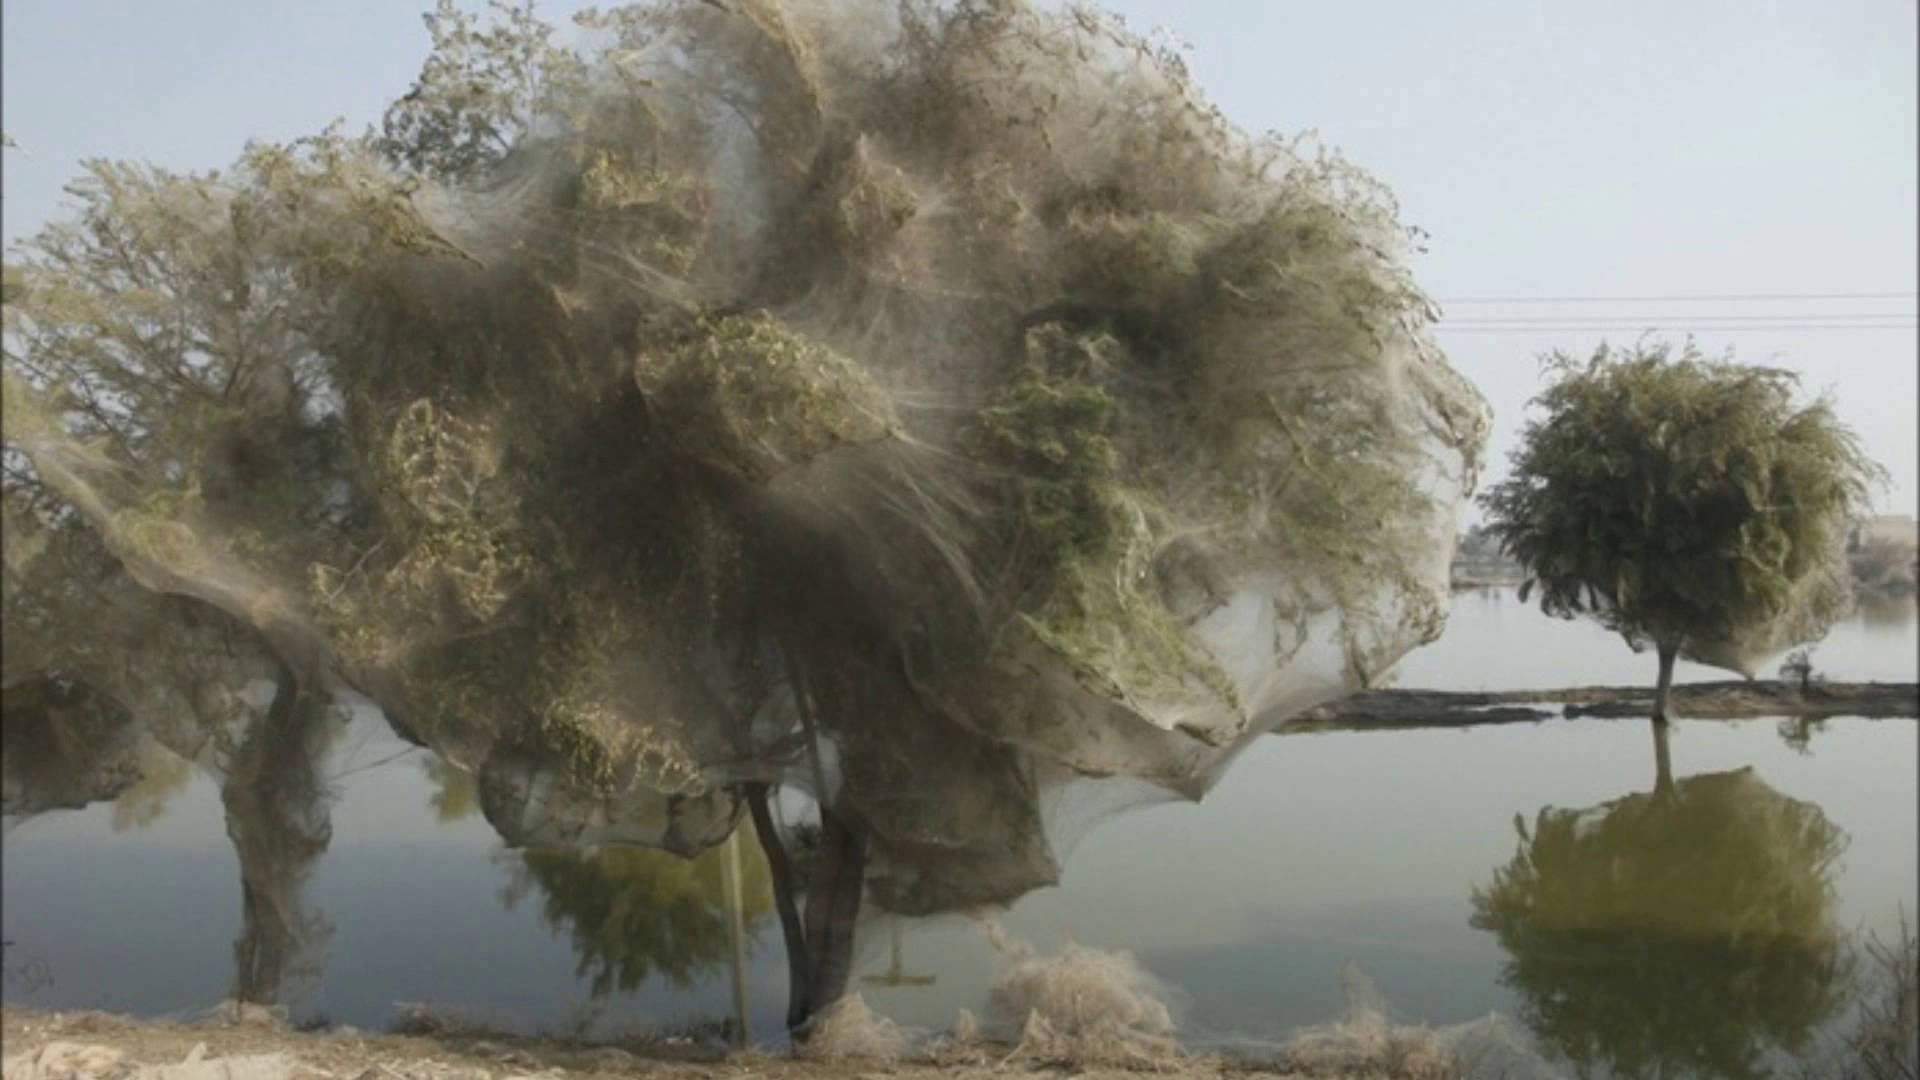 Trees Cocooned in Spider Webs After Pakistan Flood HD 2014 - YouTube